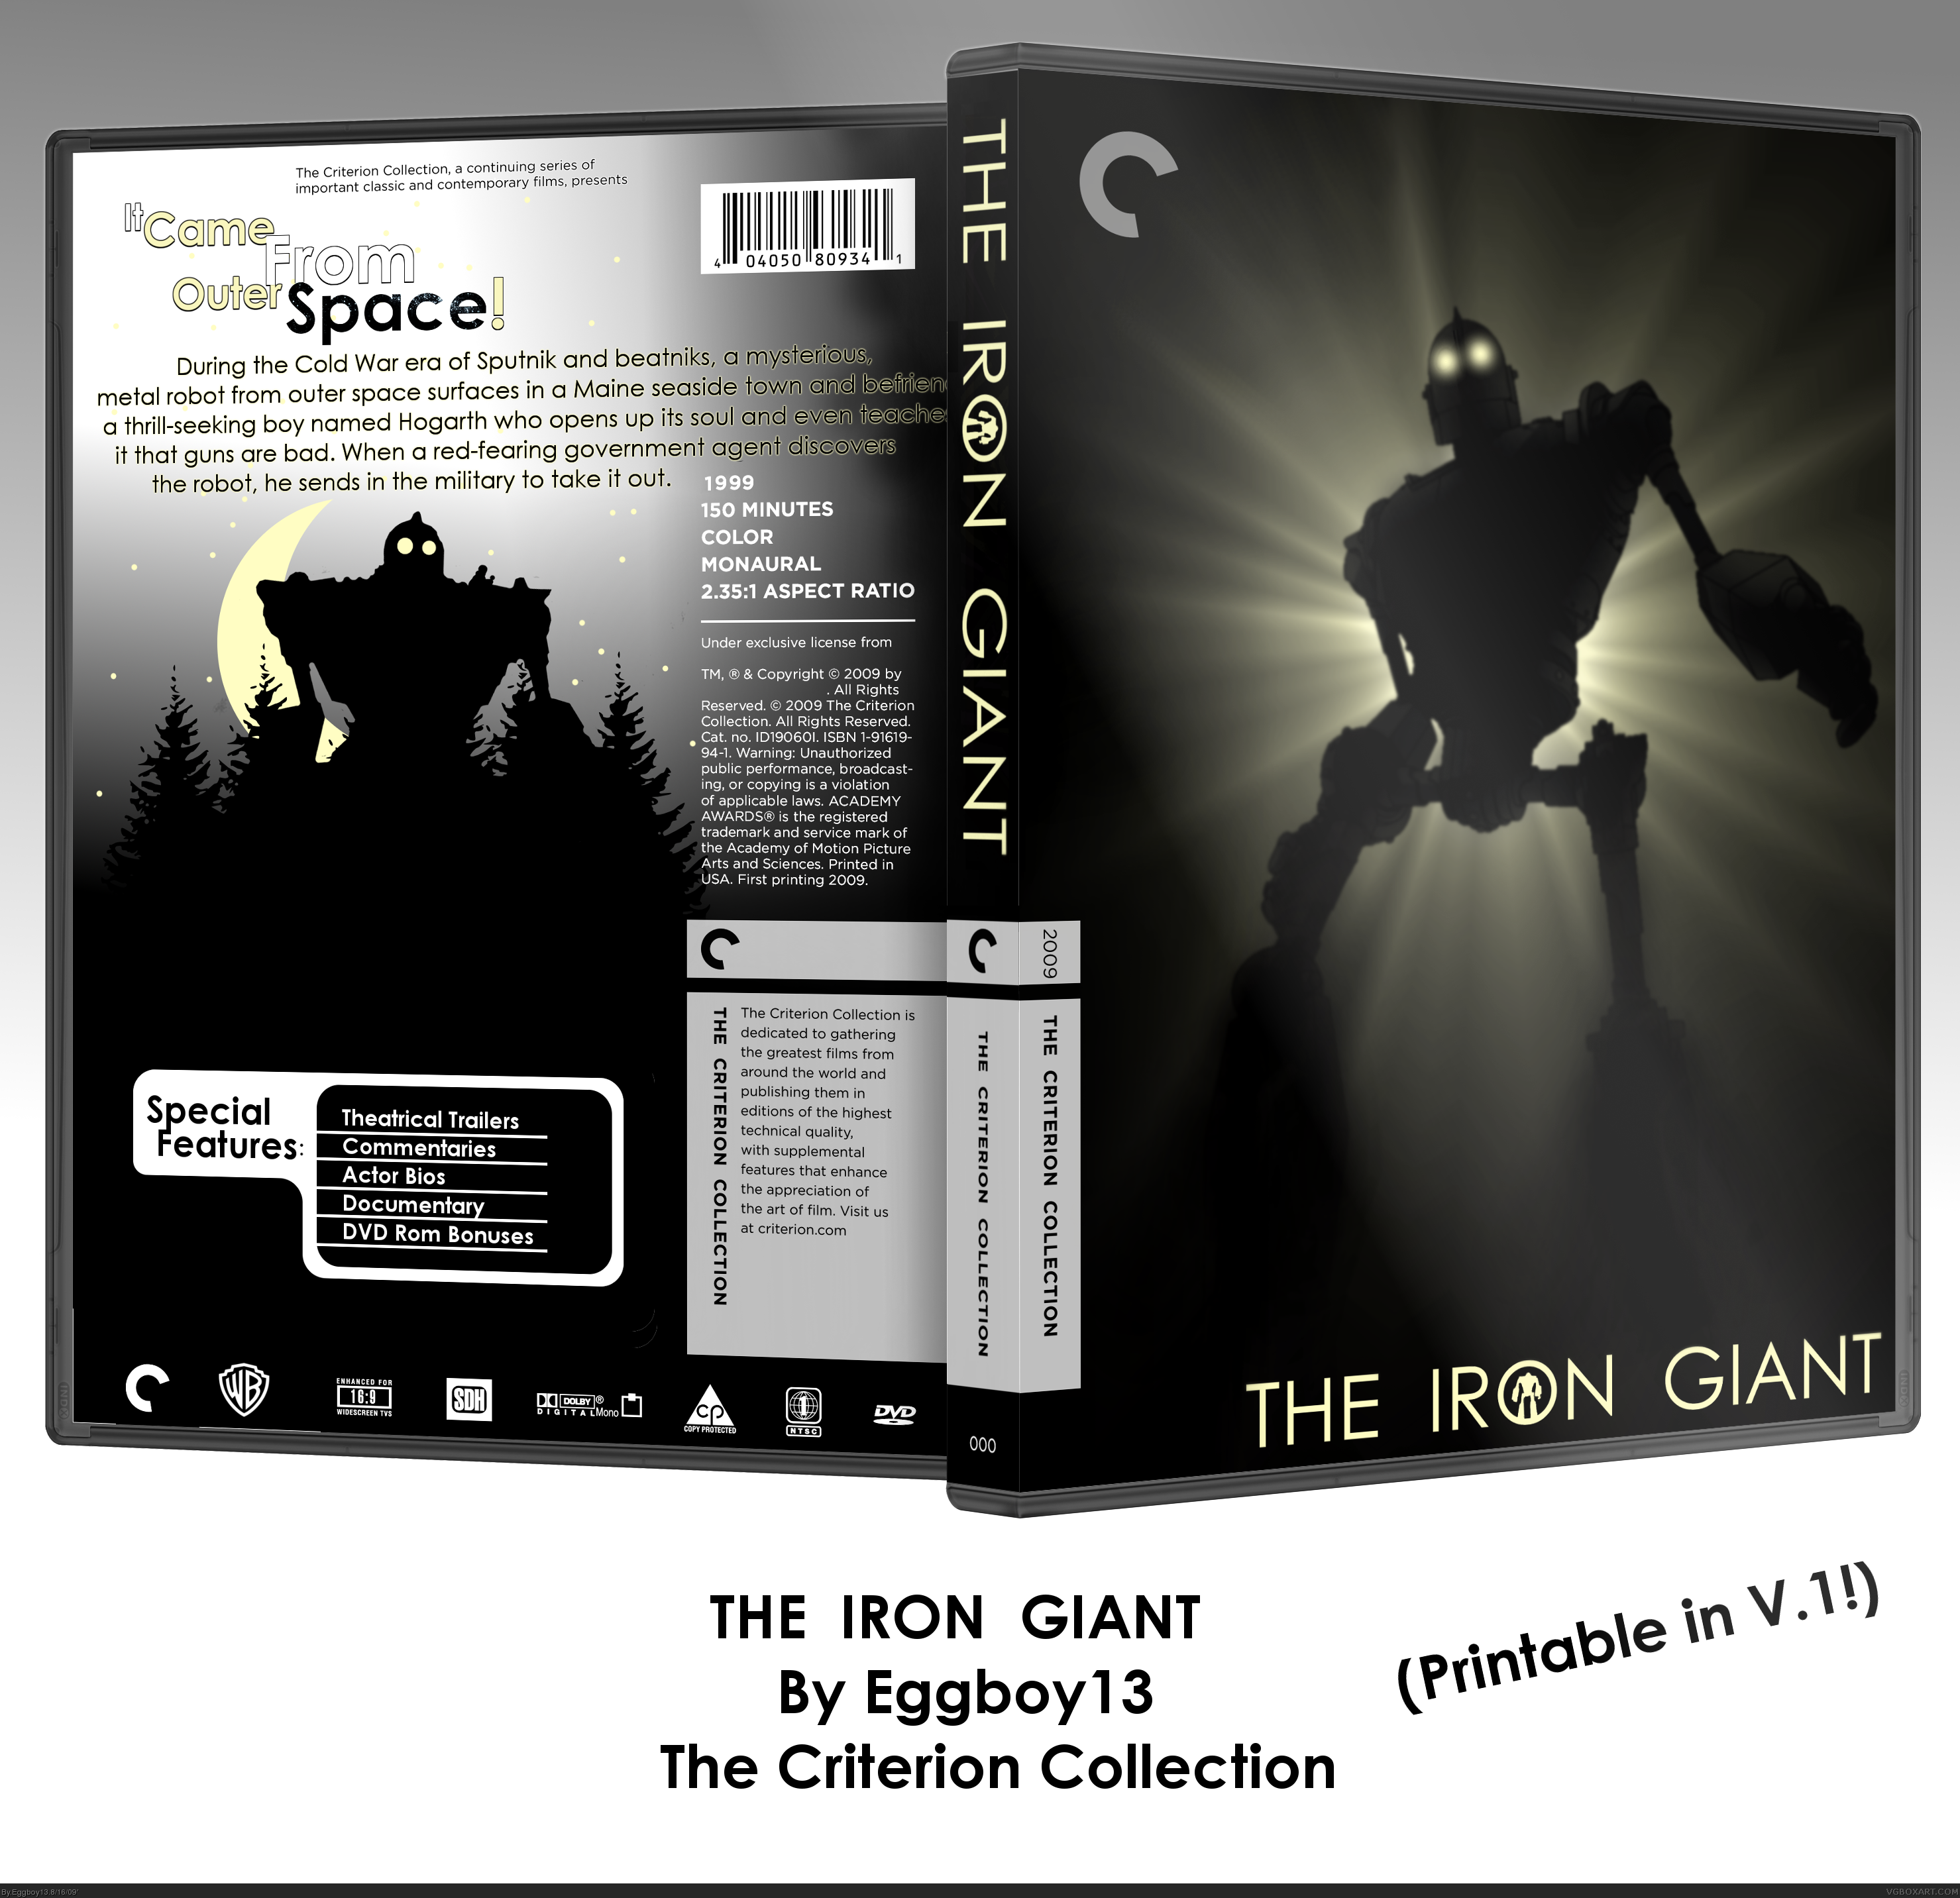 The Iron Giant box cover